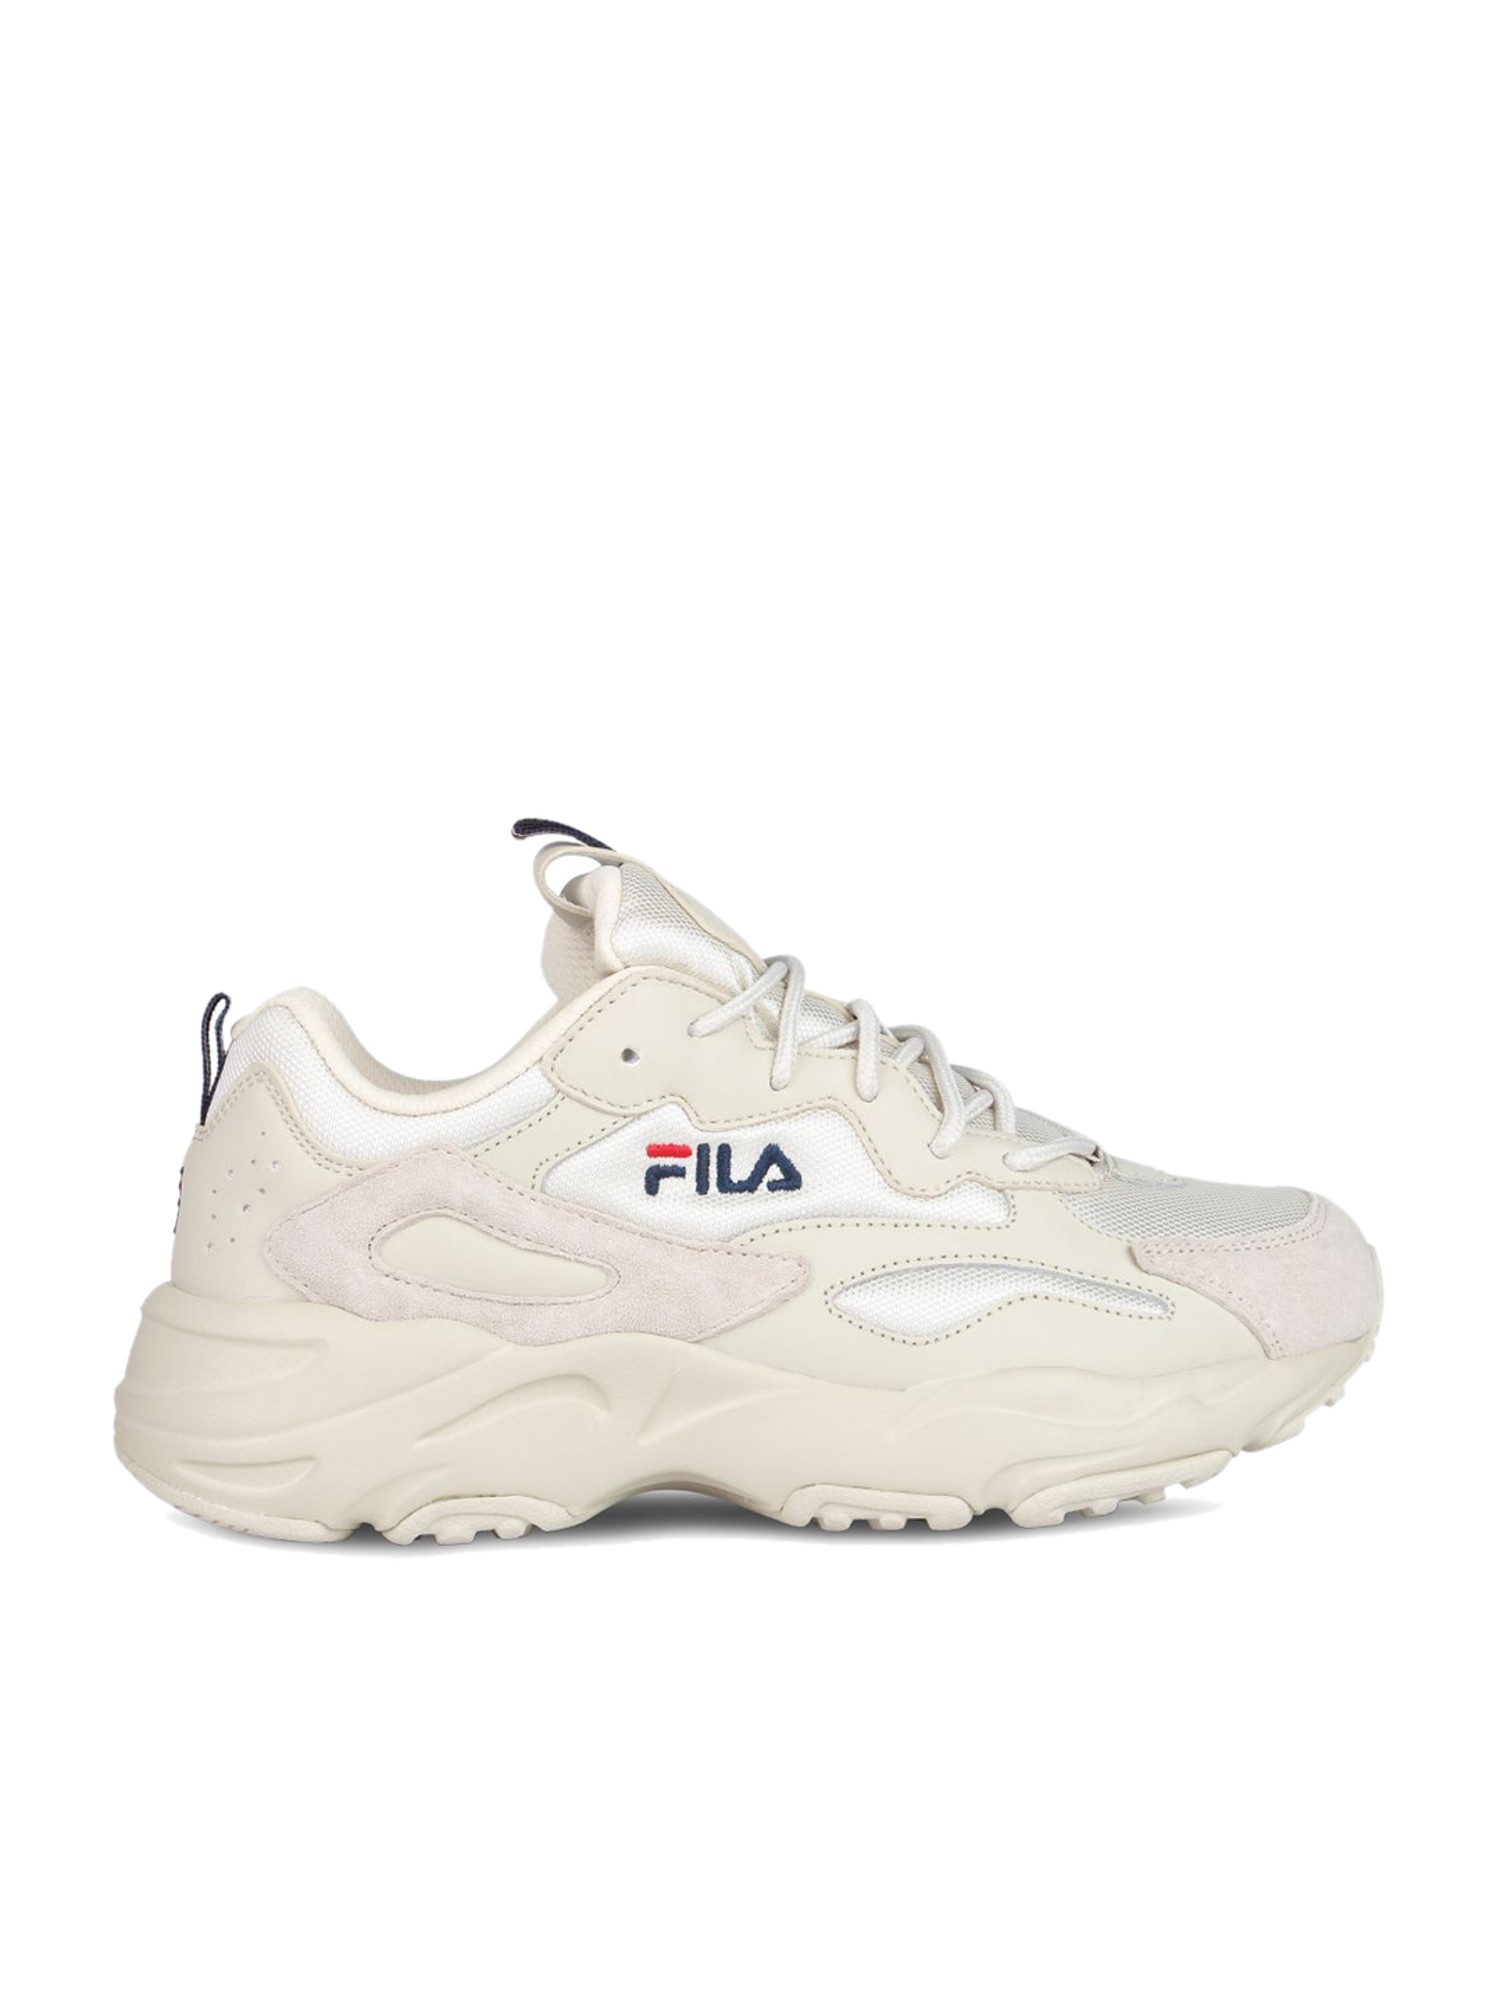 Aanbod knelpunt enthousiast Buy Fila Ray Tracer Off-White Sneakers for Men at Best Price @ Tata CLiQ